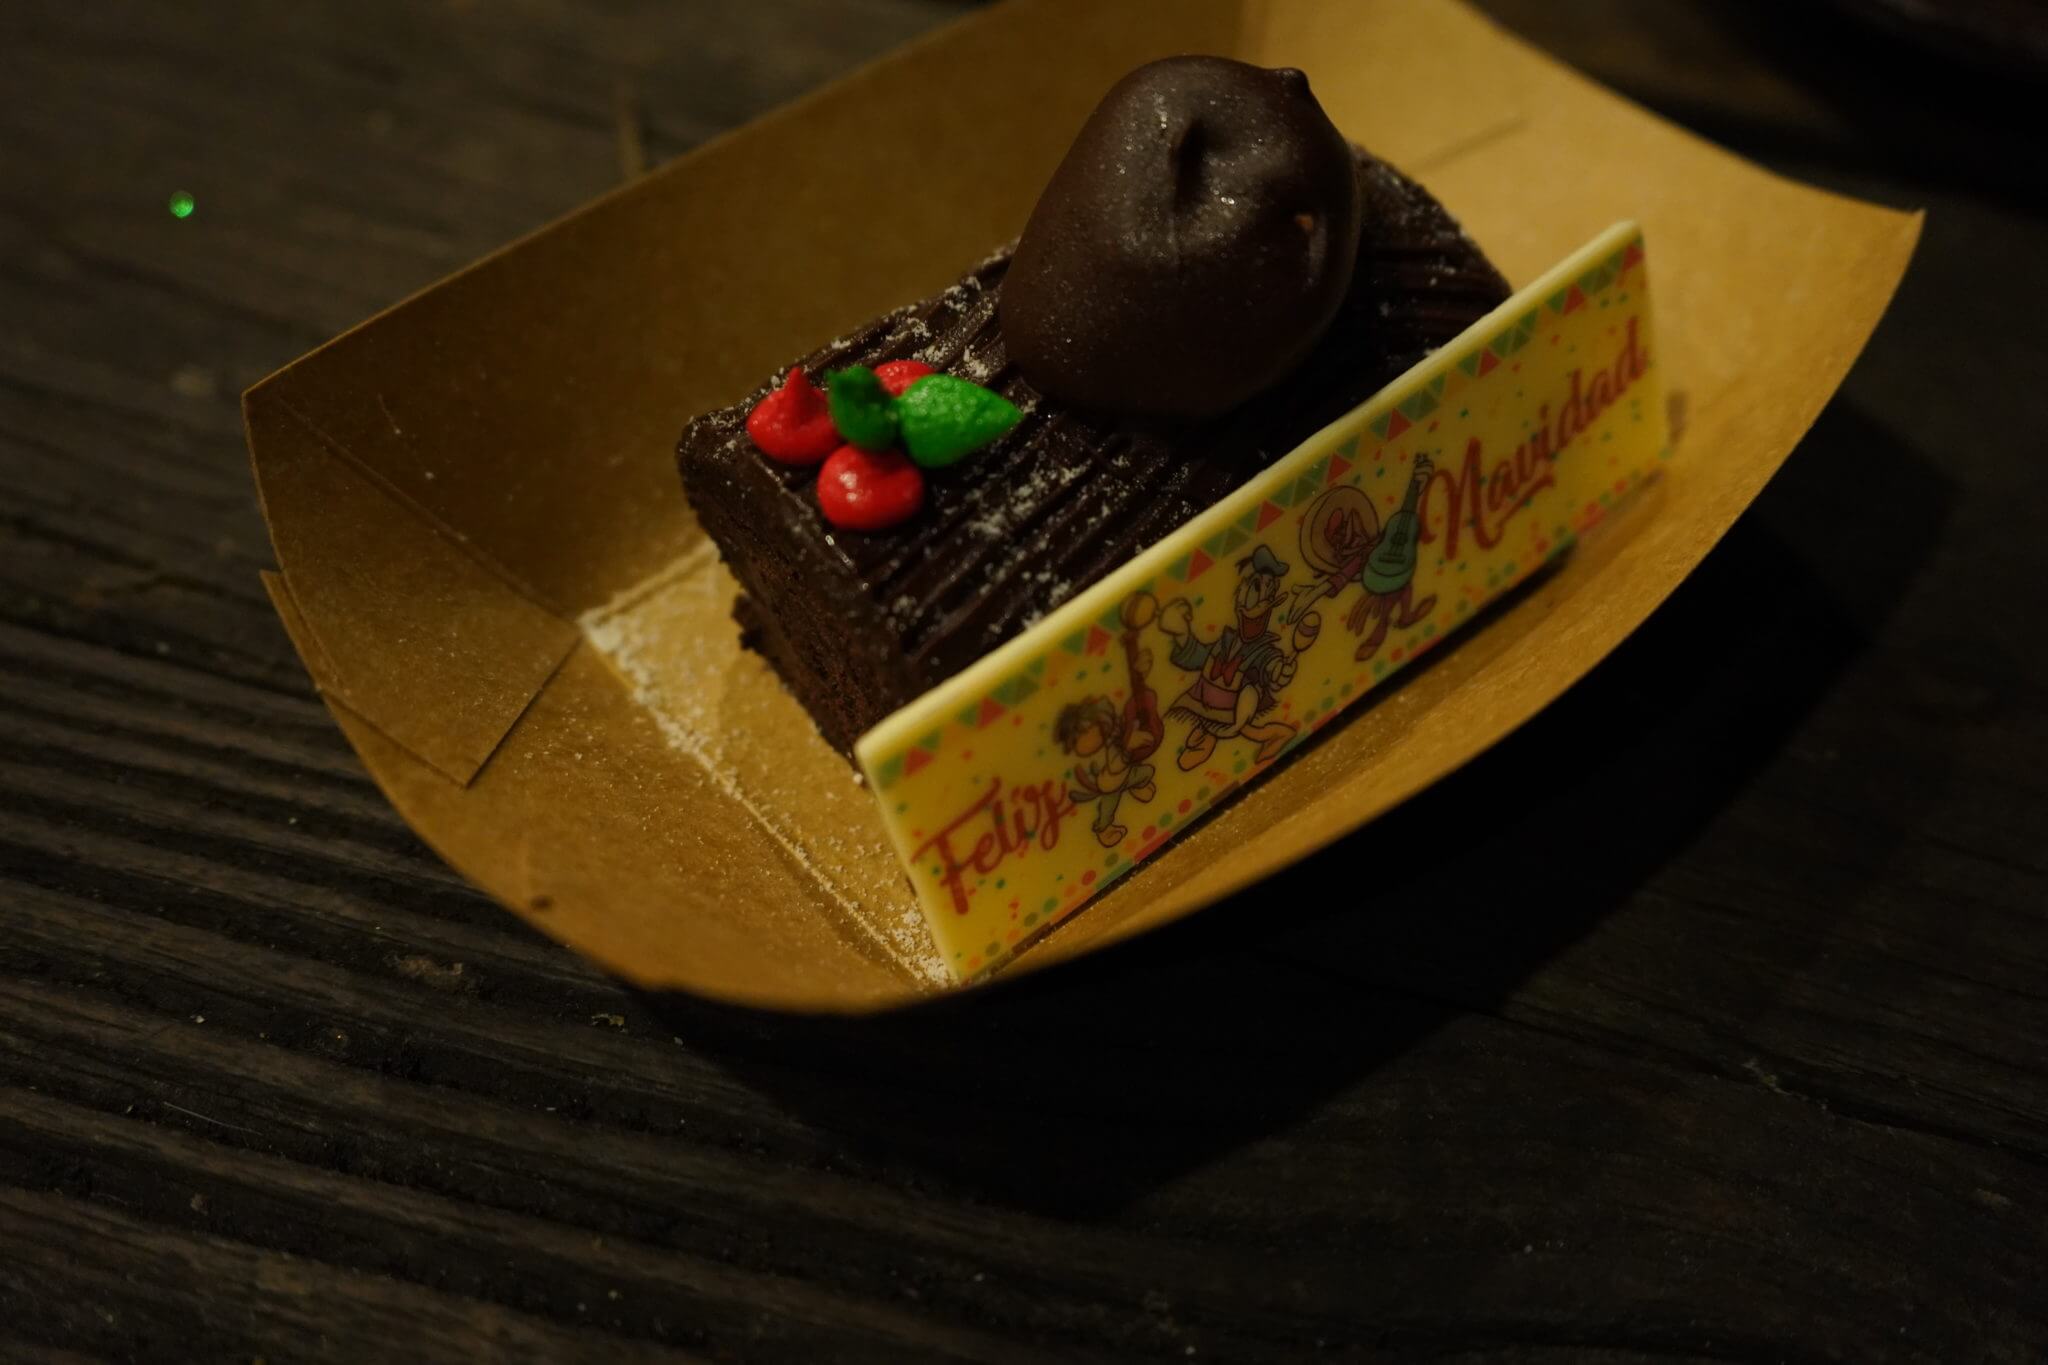 Pecos Bill - Three Caballeros Spiced Chocolate Yule Log at Mickey's Very Merry Christmas Party in Disney World